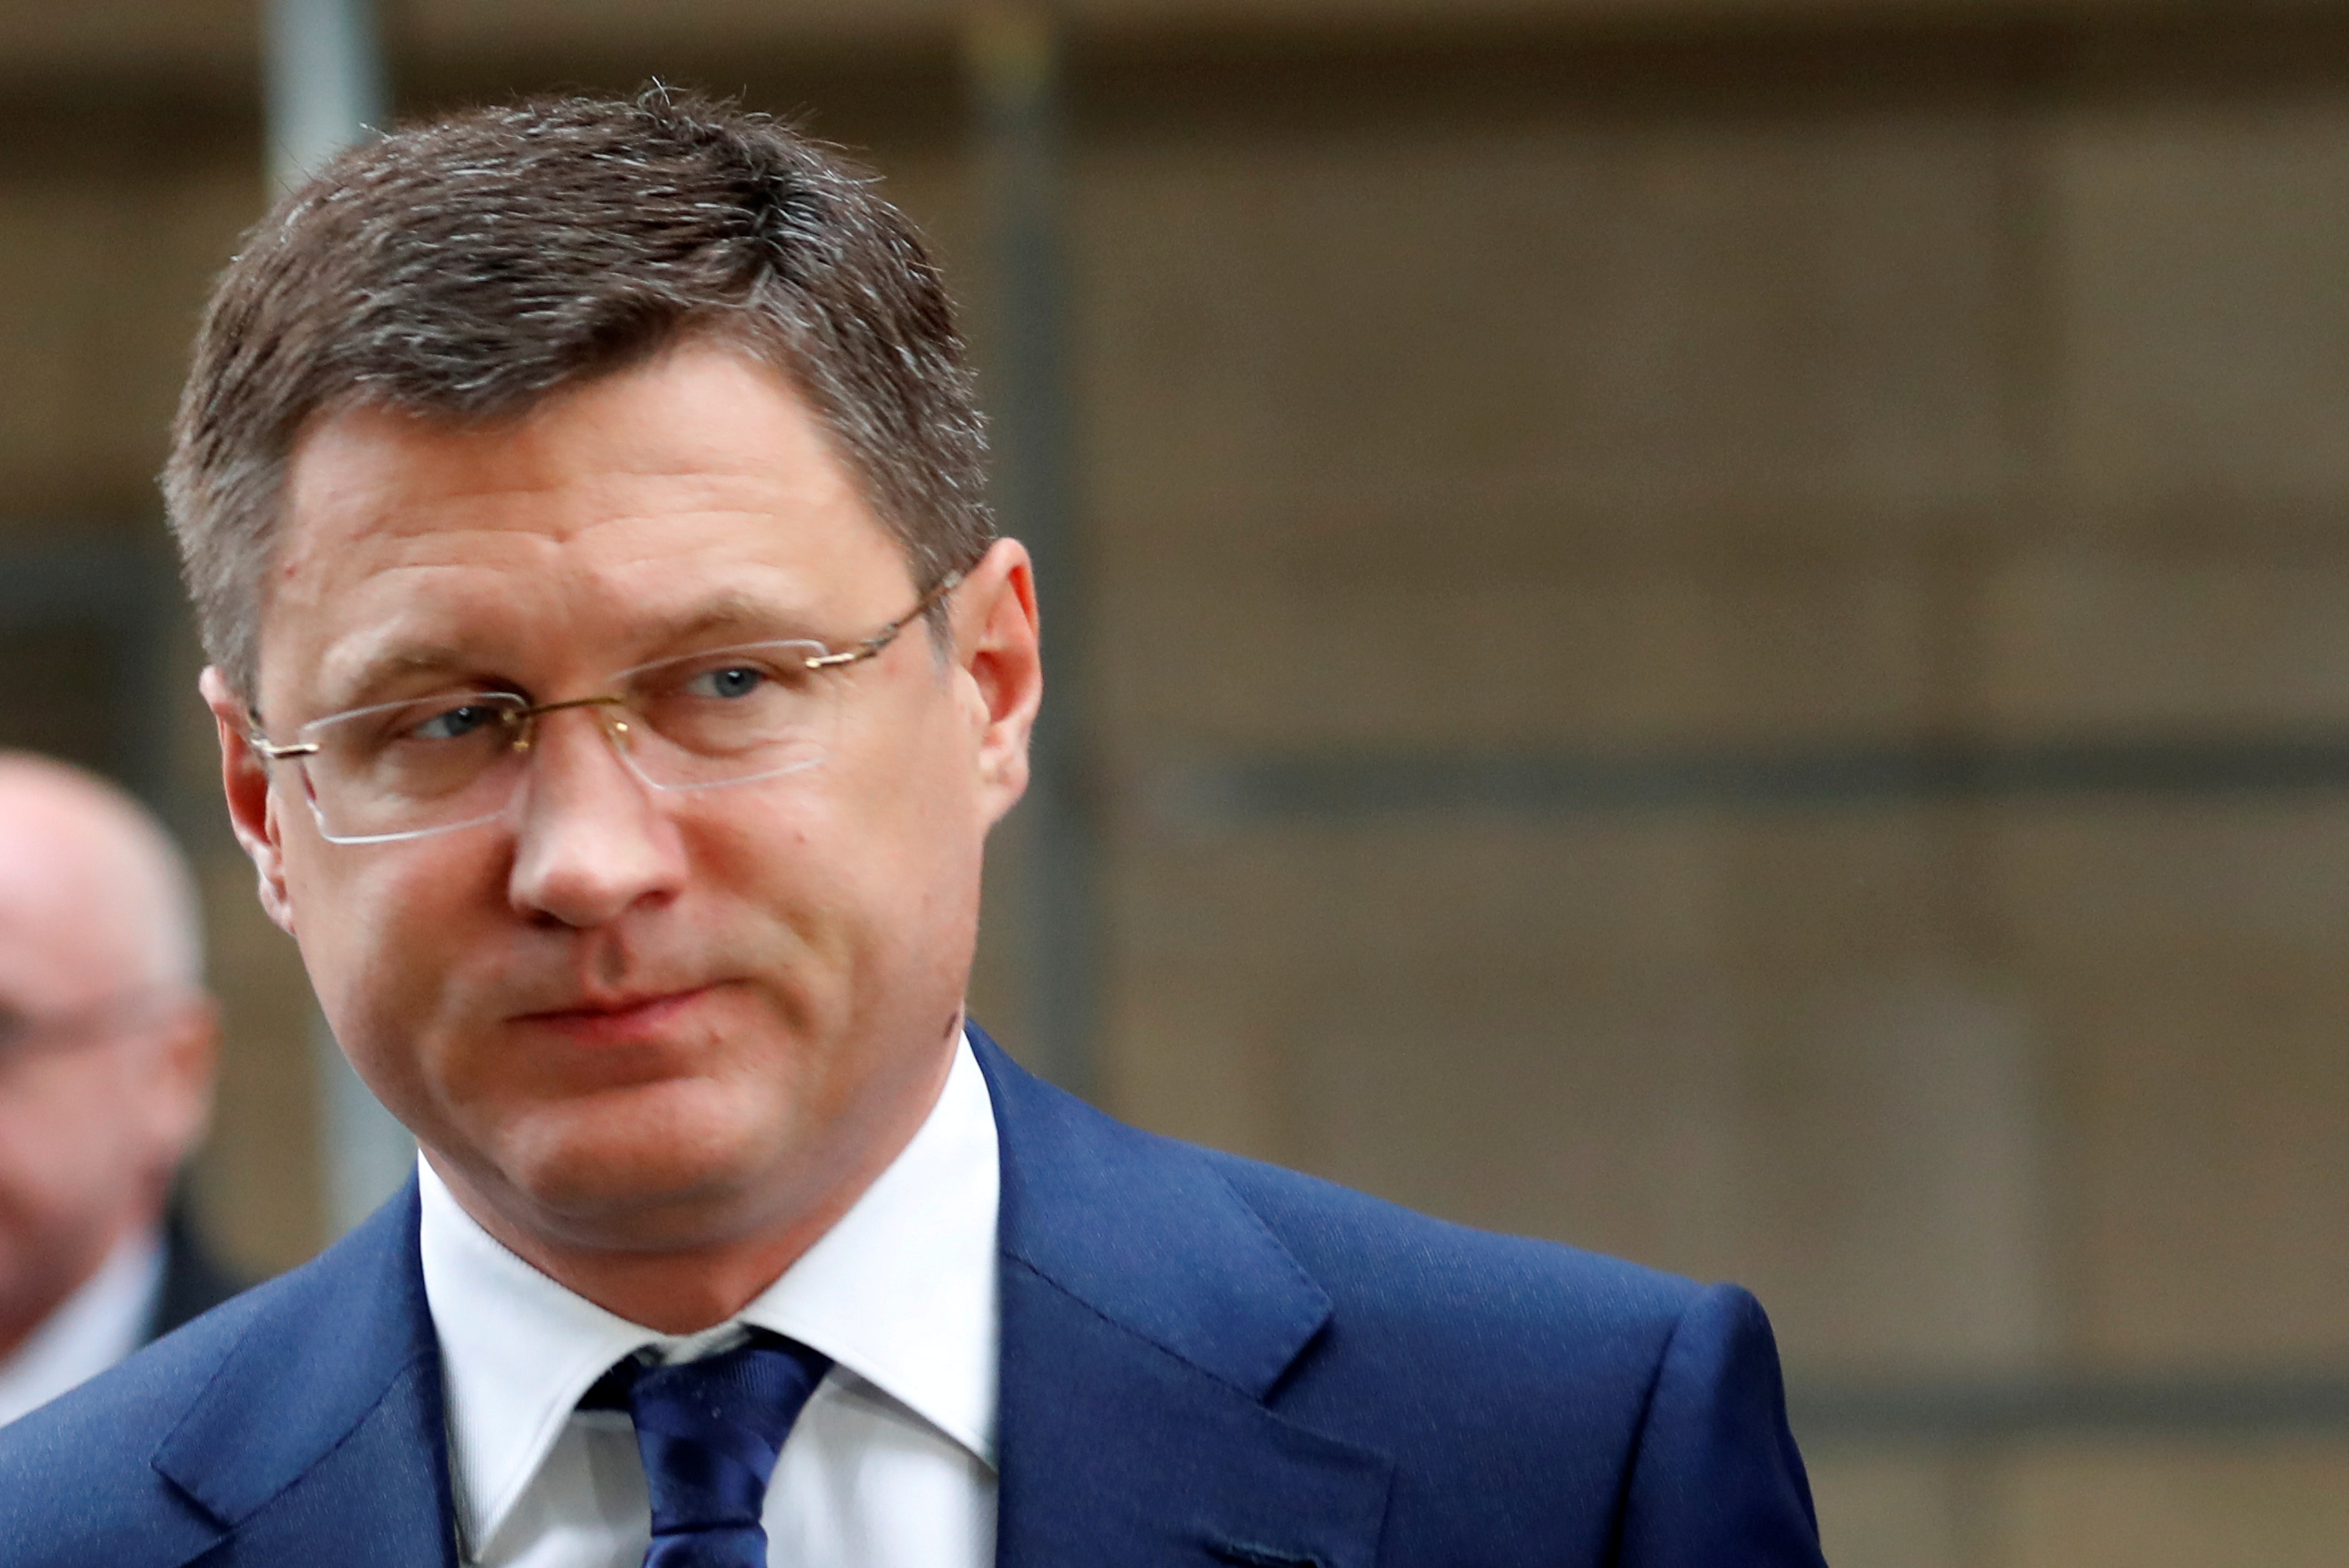 Russian Energy Minister Novak arrives at the OPEC headquarters in Vienna